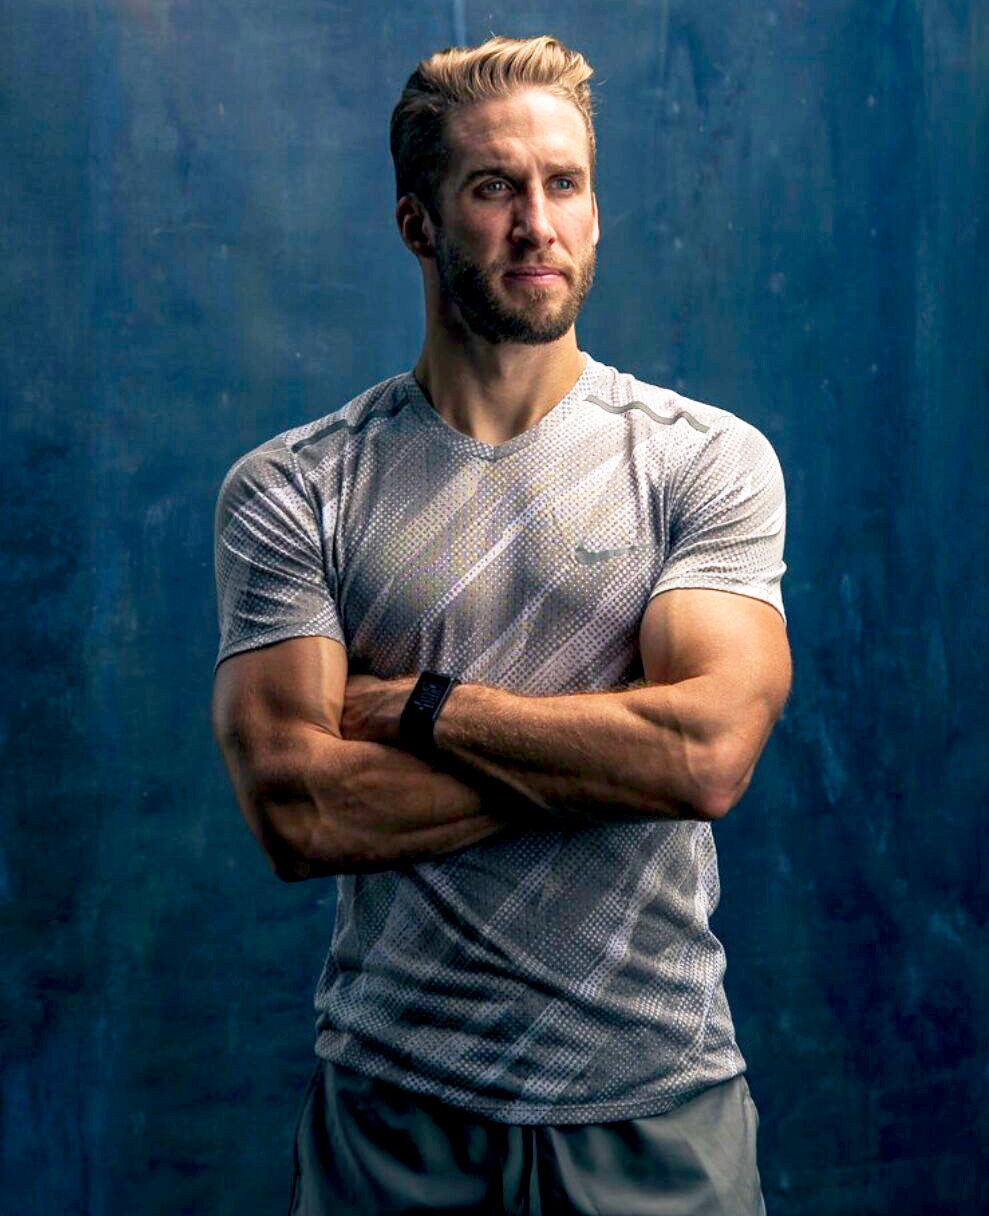 Shawn Booth for Michelob ULTRA’s debut fitness festival ULTRA Fit Fest on May 14, 2018.